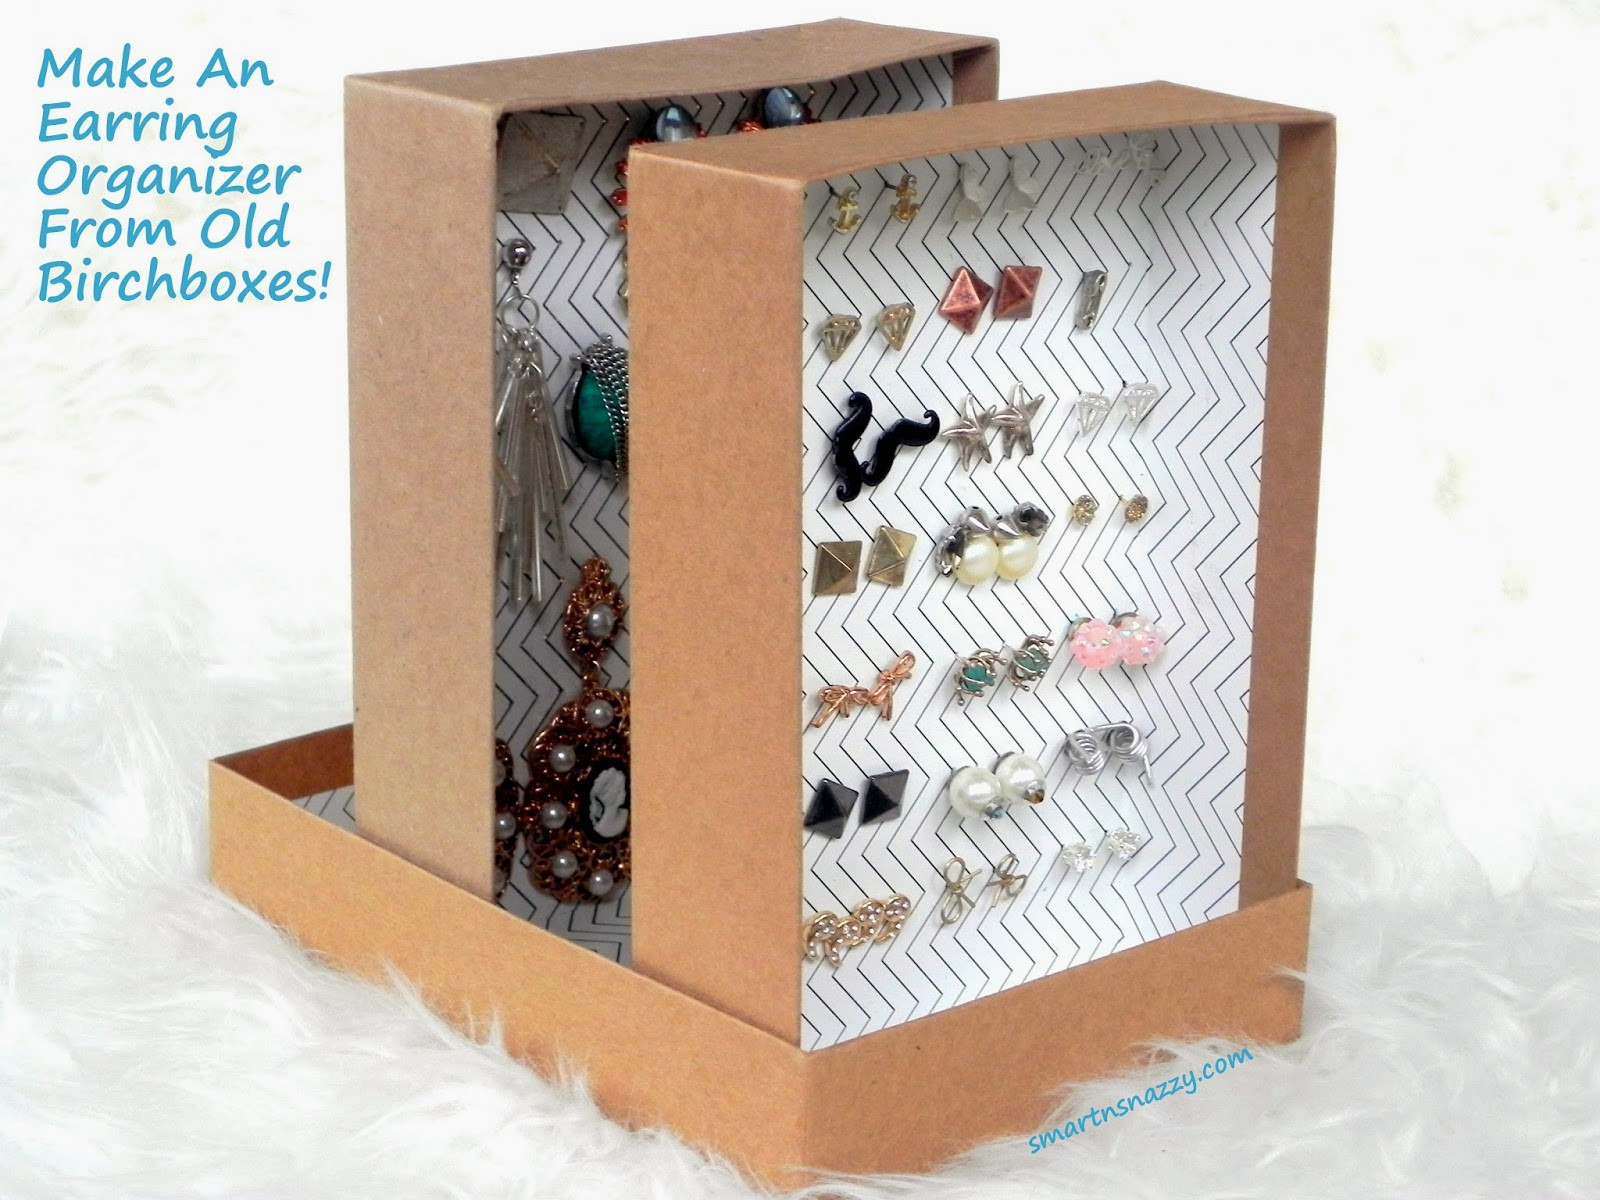 DIY Stud Earring Organizer
 Smart n Snazzy DIY Upcycled Birchboxes Into Earring